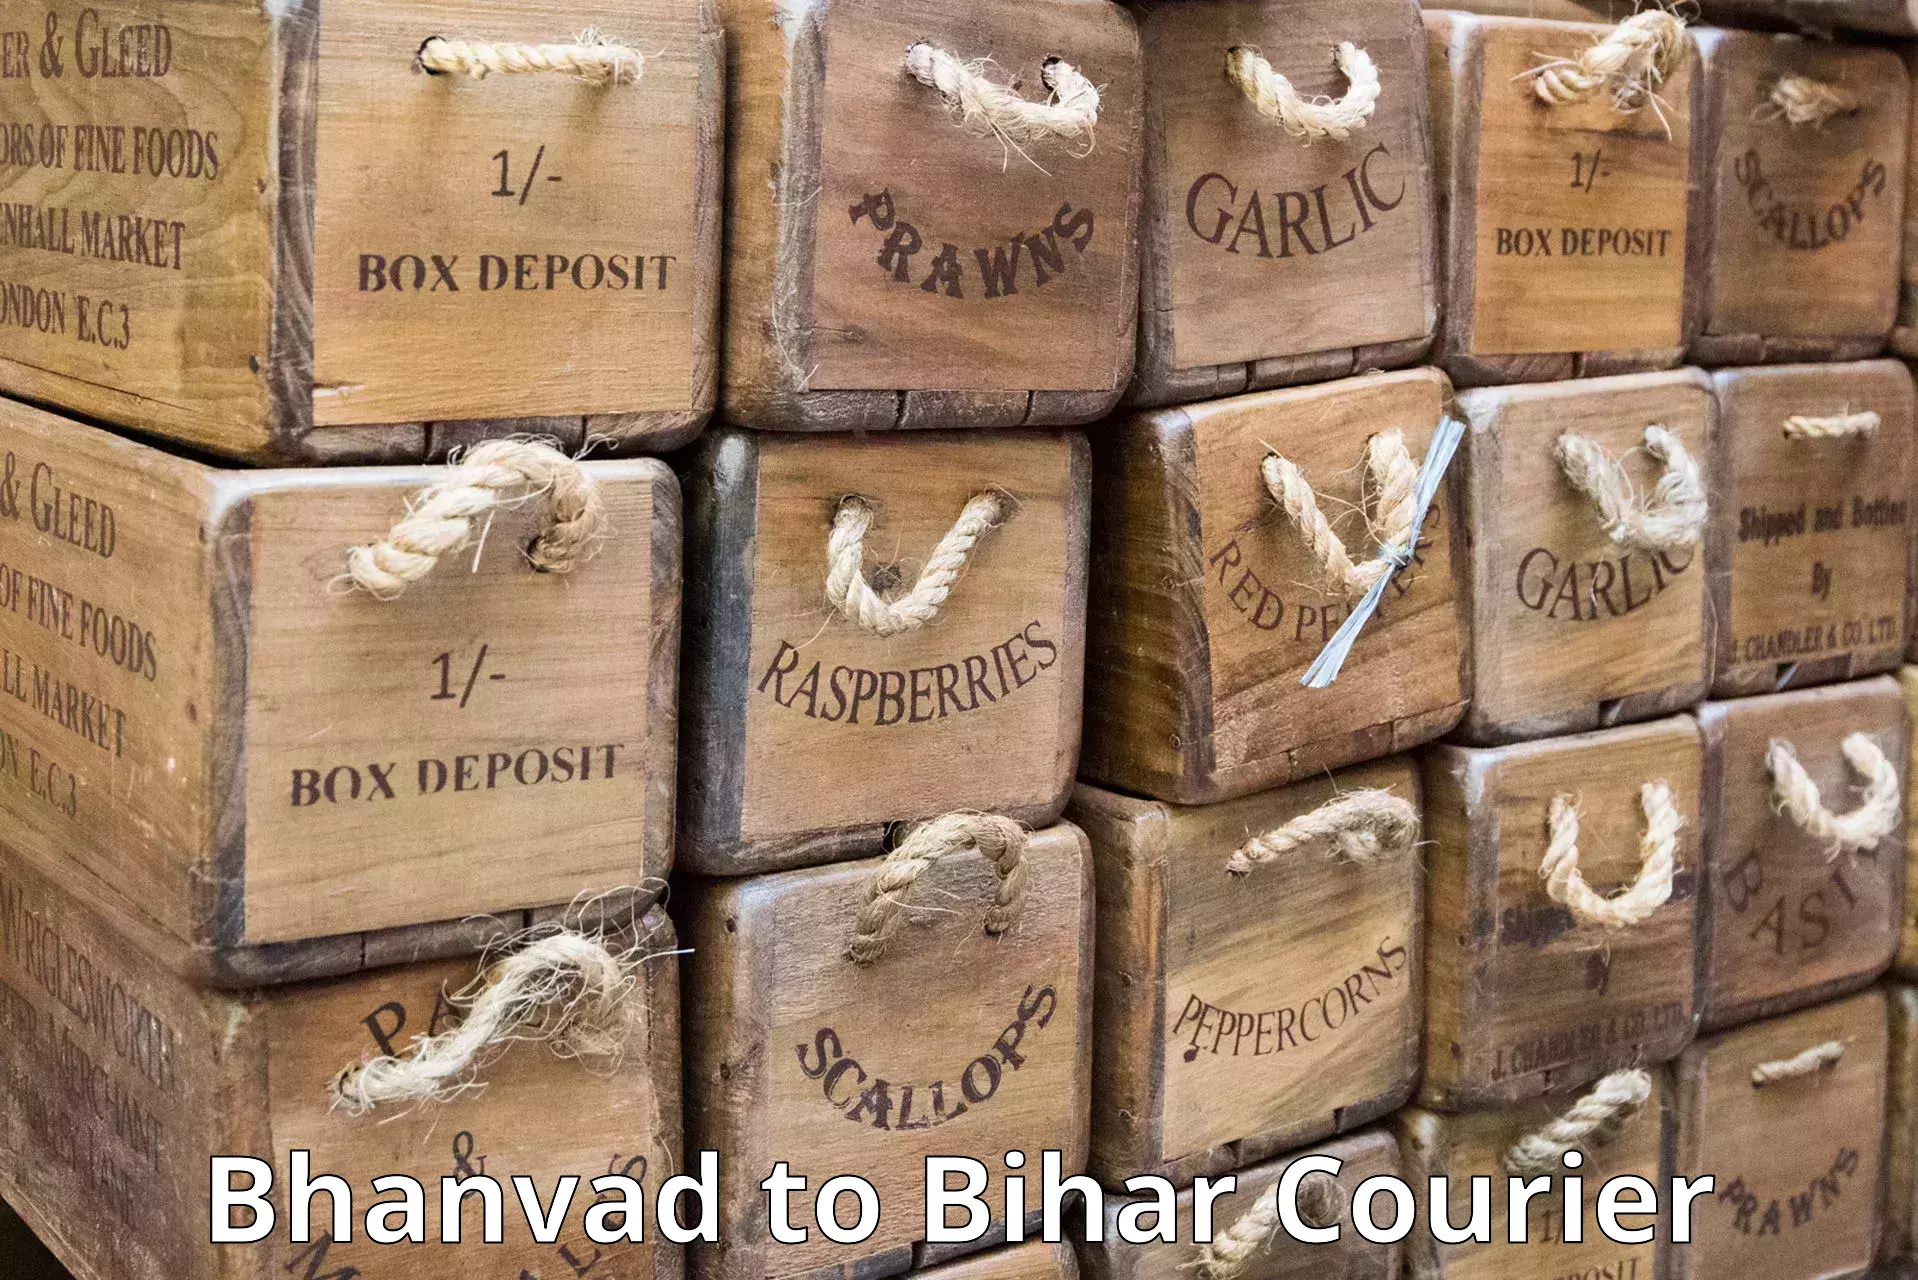 Courier service comparison Bhanvad to Mahaddipur